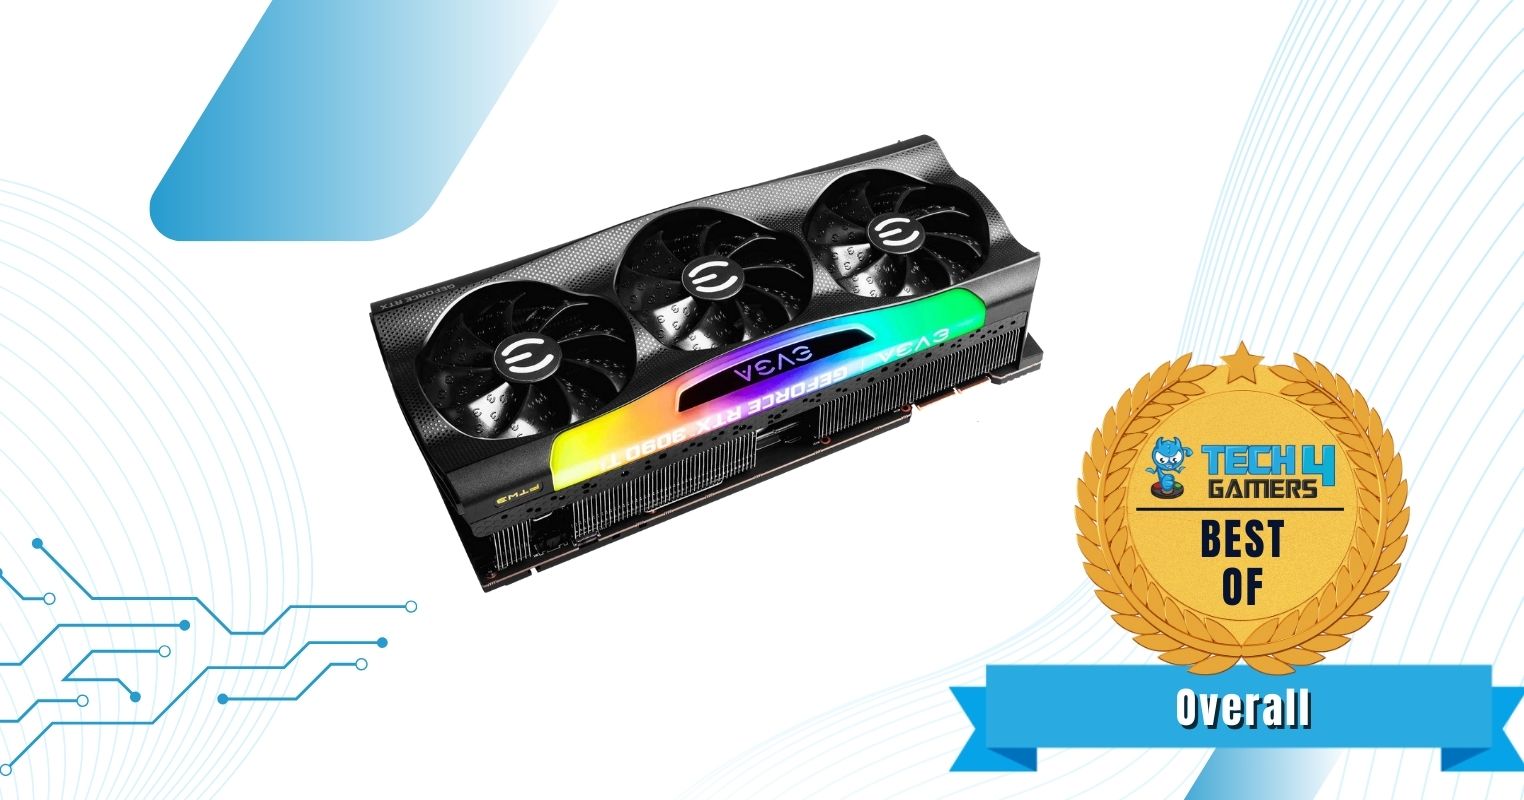 Best Overall RTX 3090 Ti Graphics Card - EVGA GeForce RTX 3090 Ti FTW3 Ultra Gaming